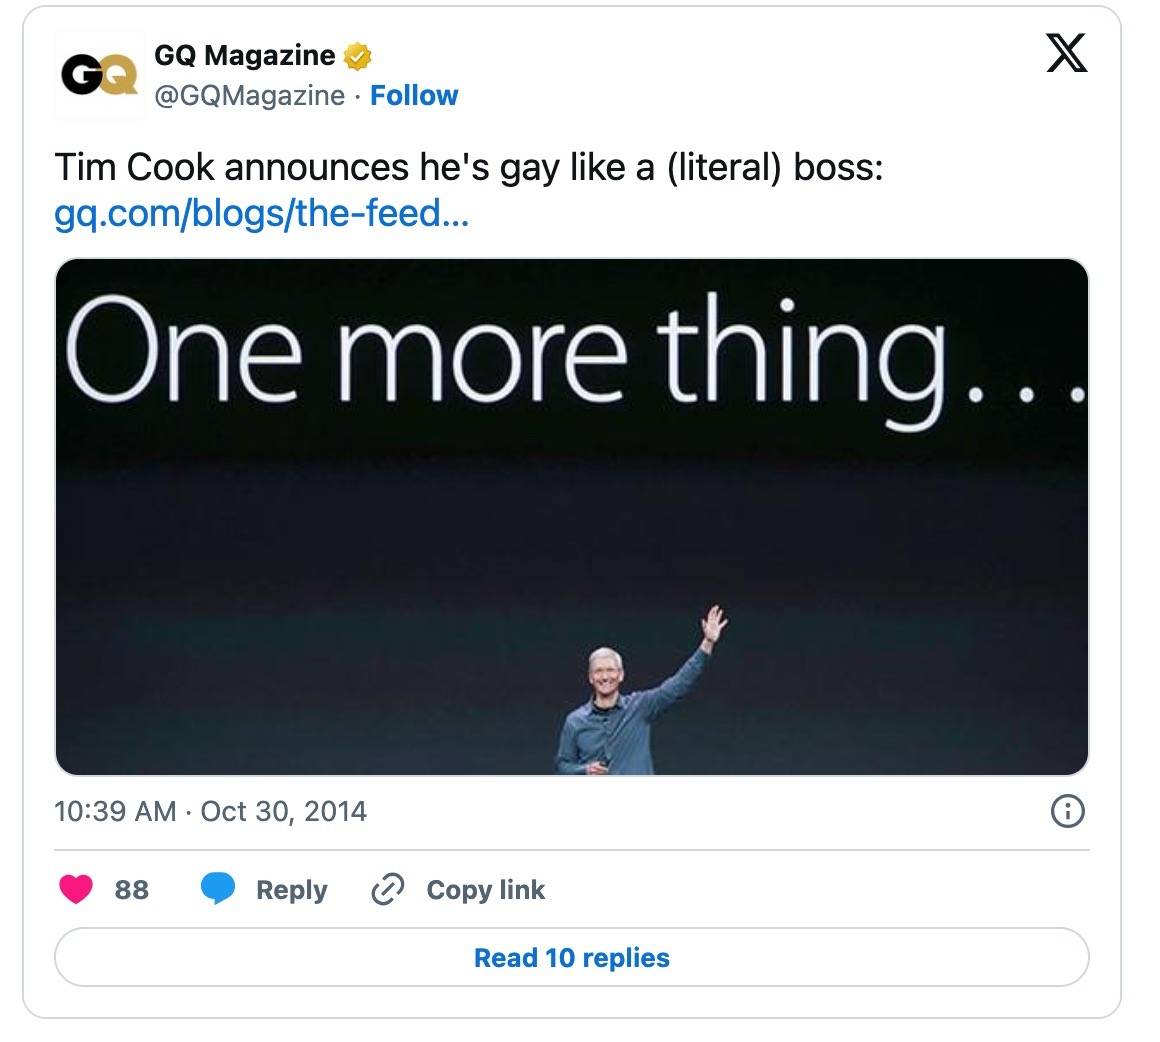 GQ Support for Tim Cook coming out as Gay